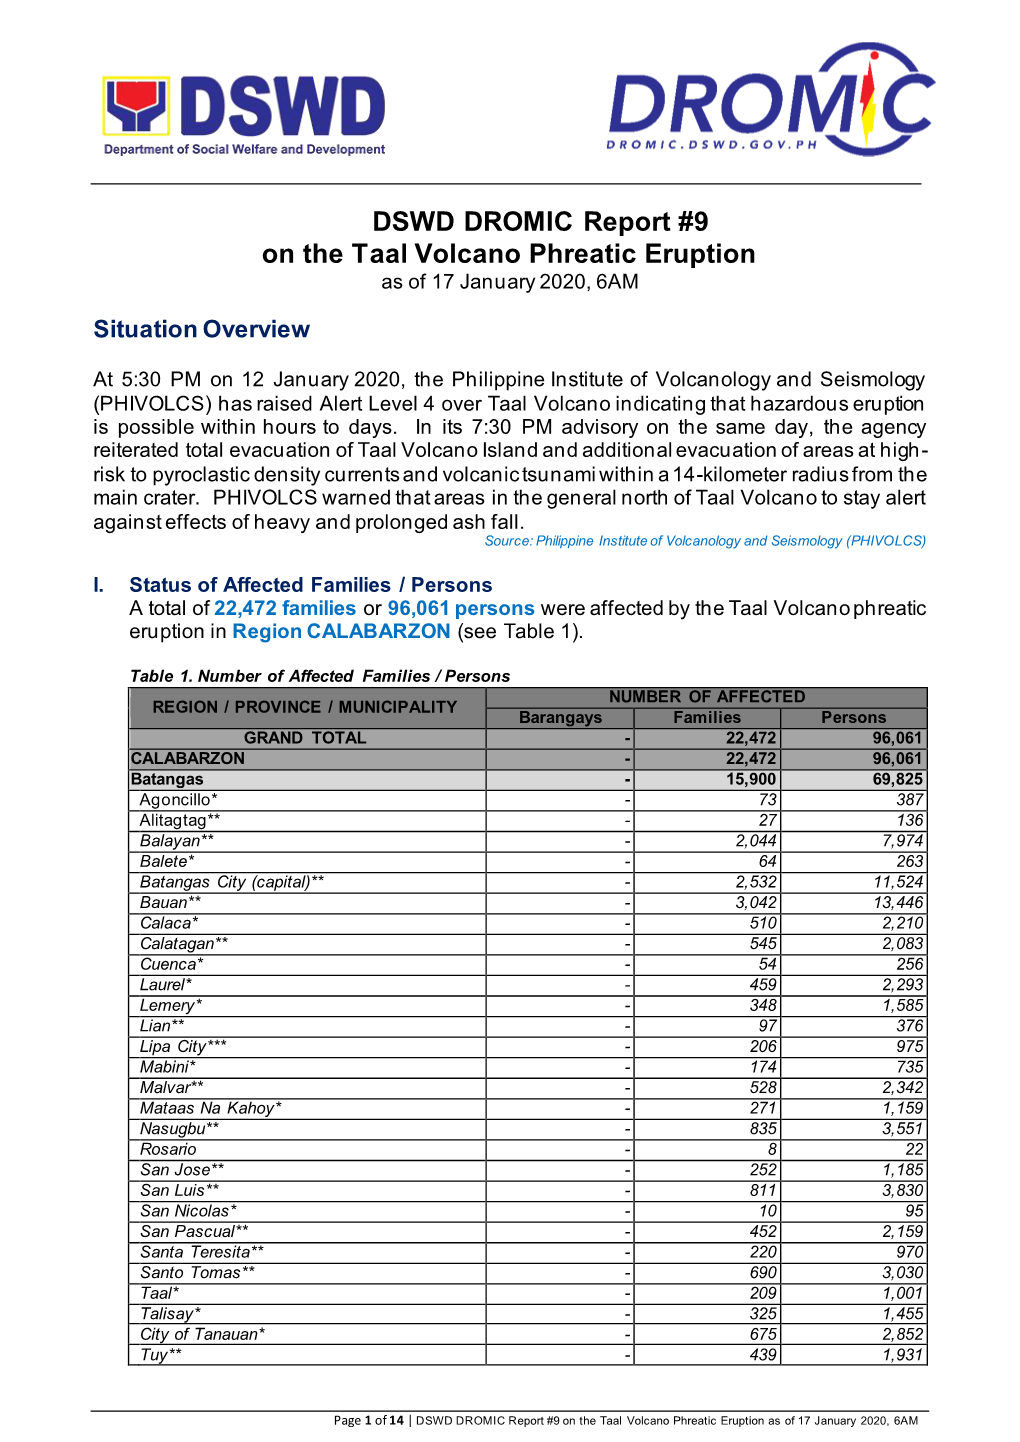 DSWD DROMIC Report #9 on the Taal Volcano Phreatic Eruption As of 17 January 2020, 6AM